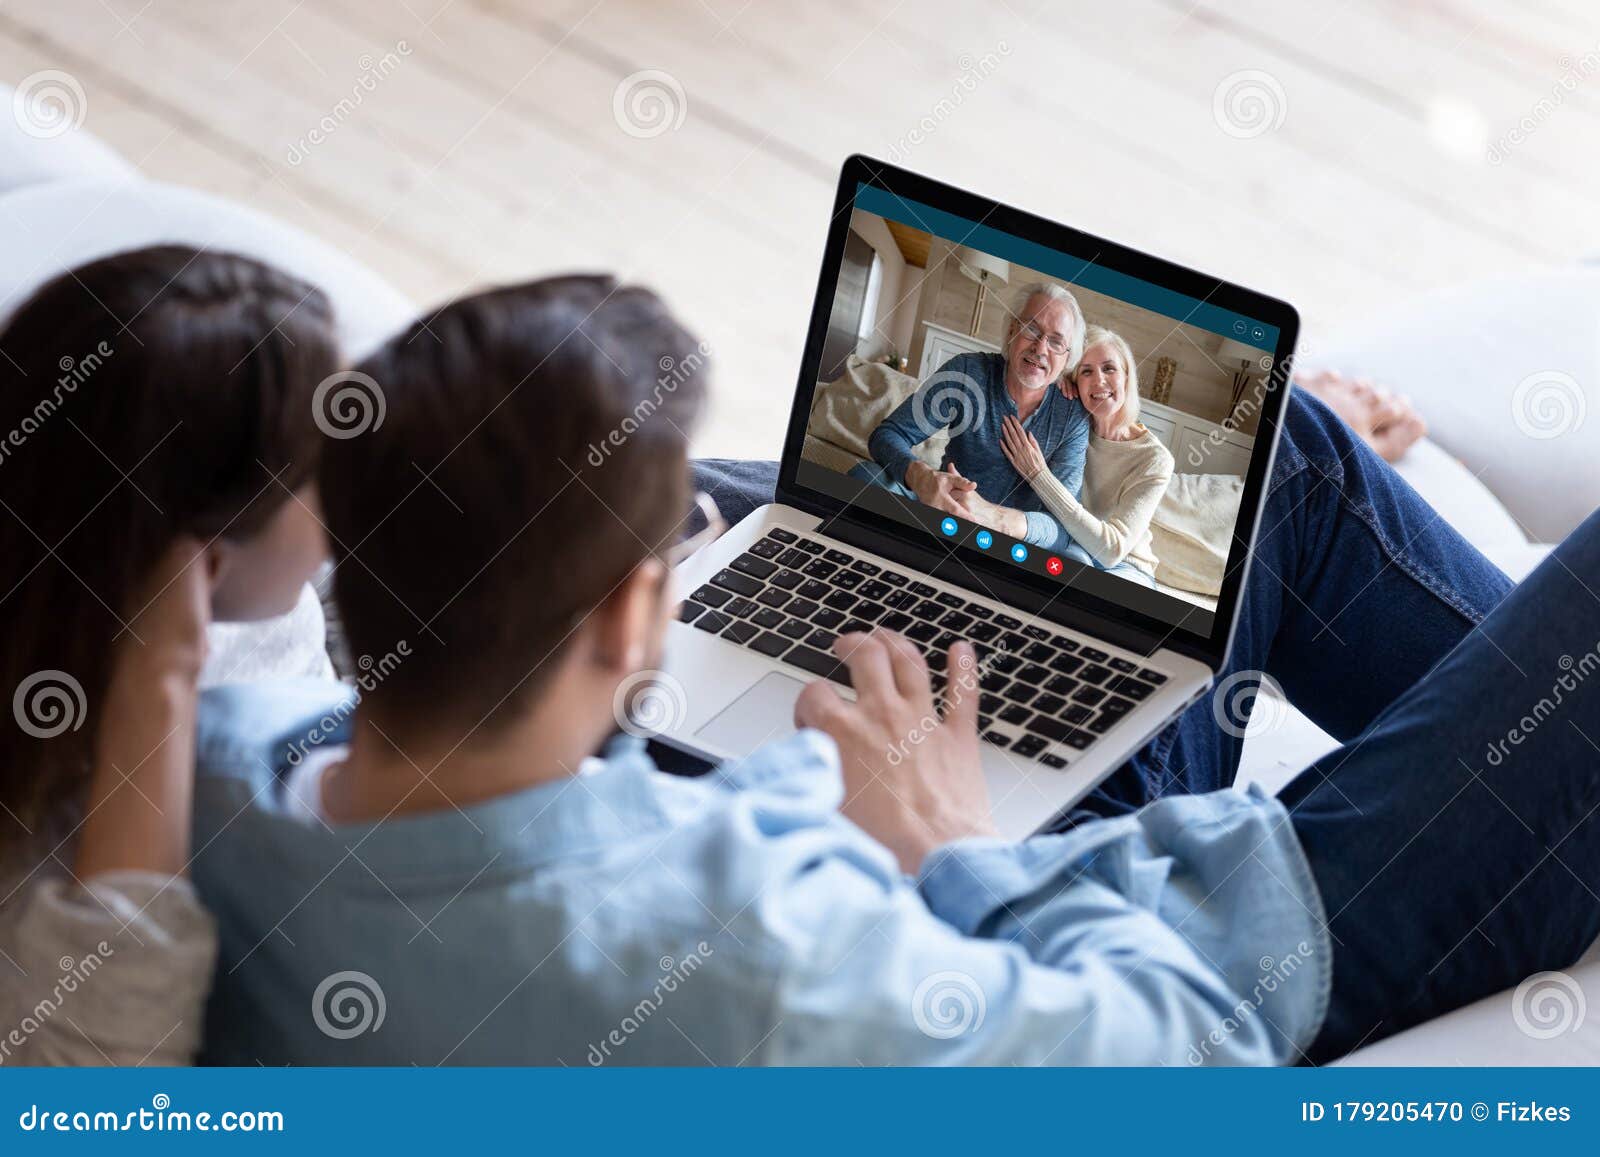 couple communicating with elderly parents using laptop and videocall app